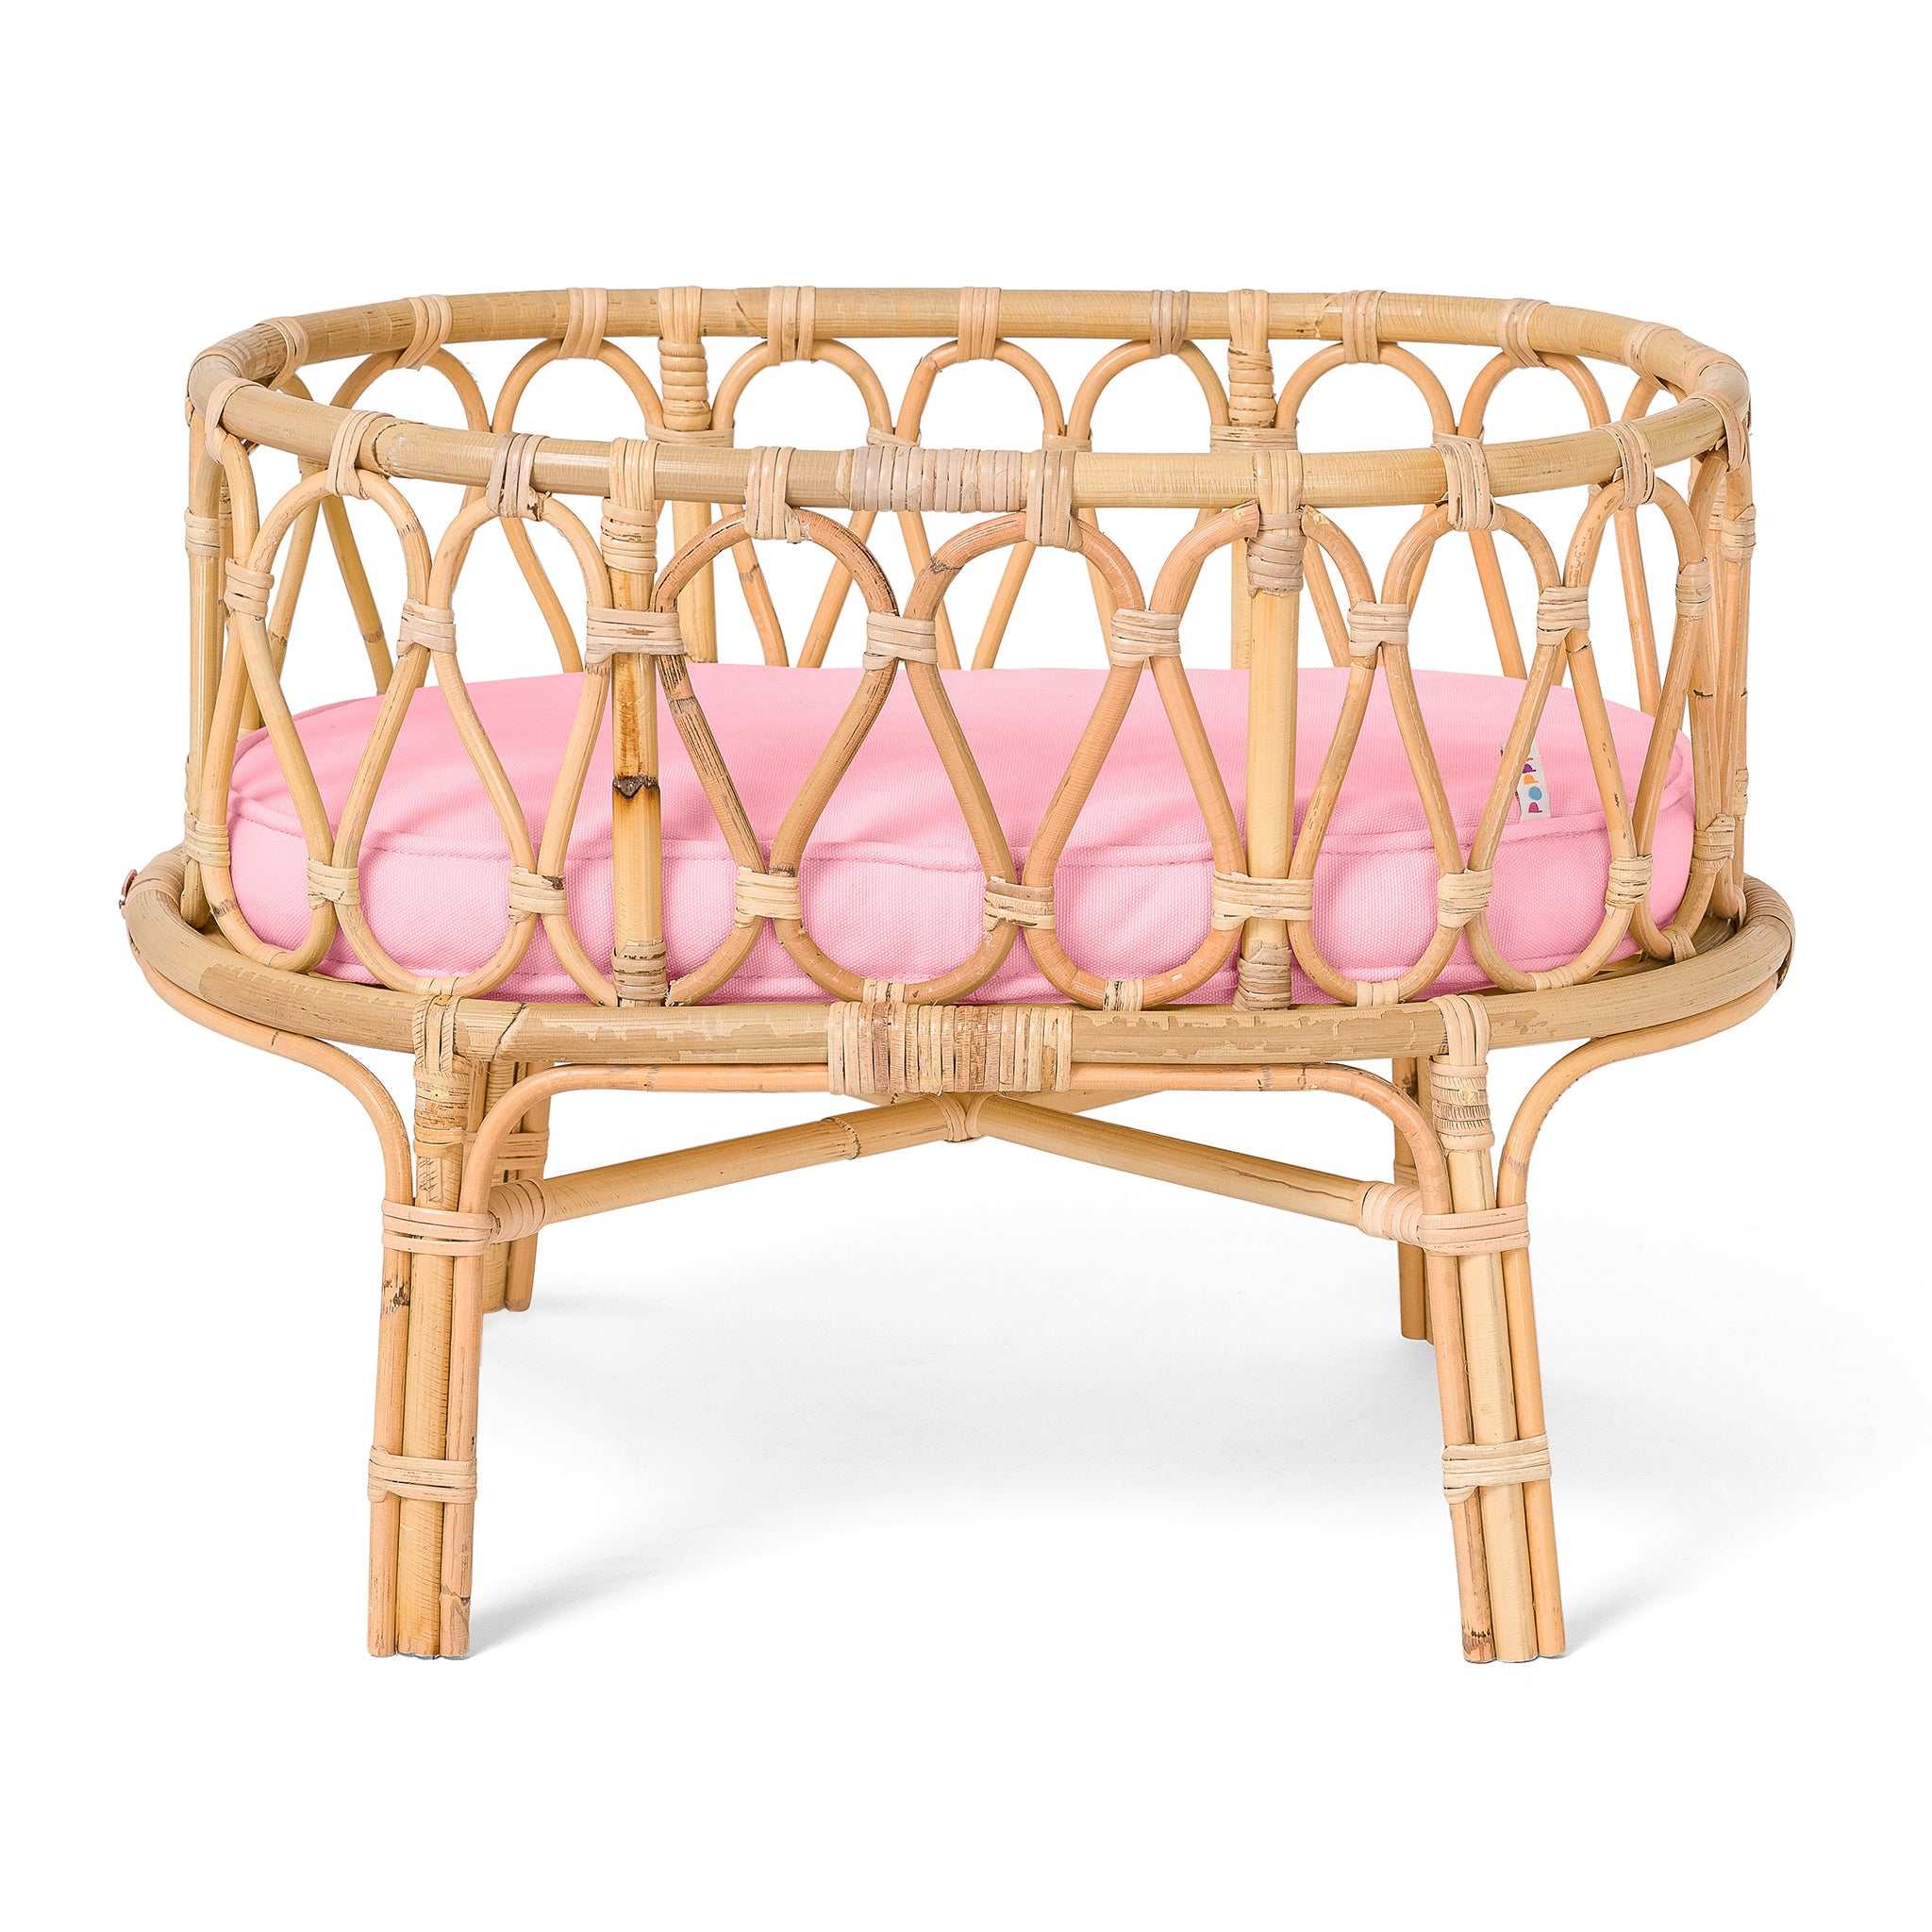 Poppie Toys Poppie Crib Classic Collection Pink